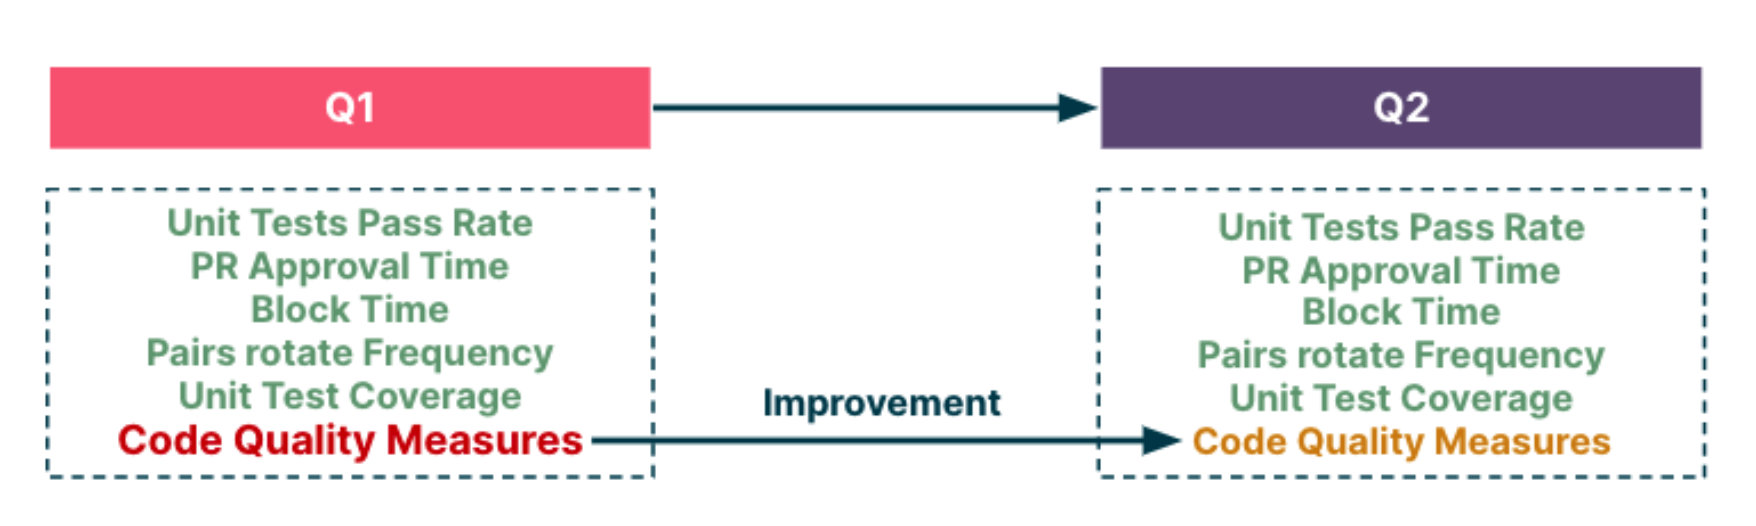 This diagram is an example of demonstrating an improvement of code quality measures over a quarter